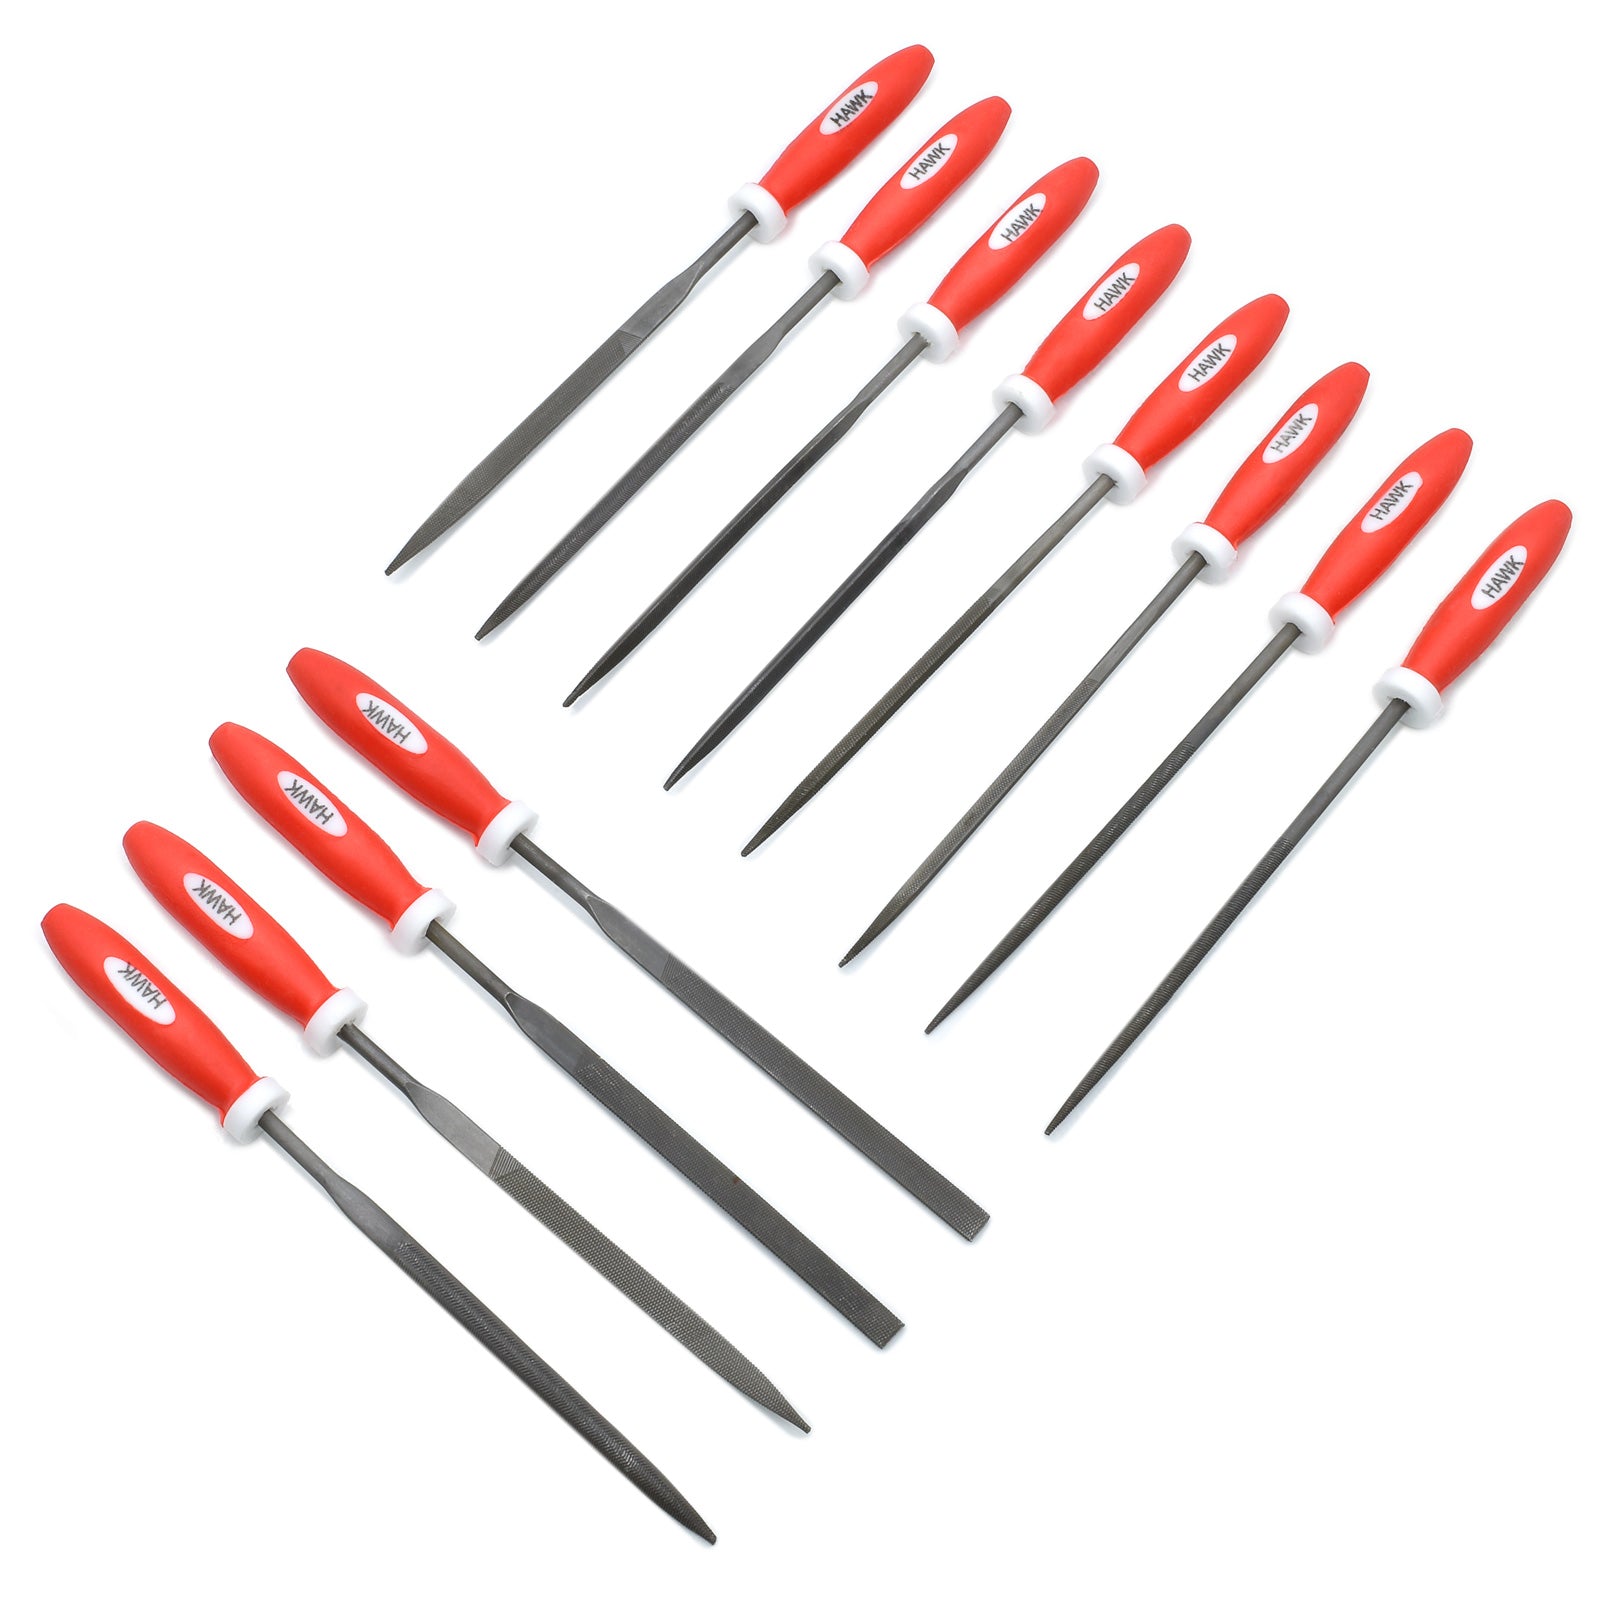 12 Pieces Pro File Set with Handles